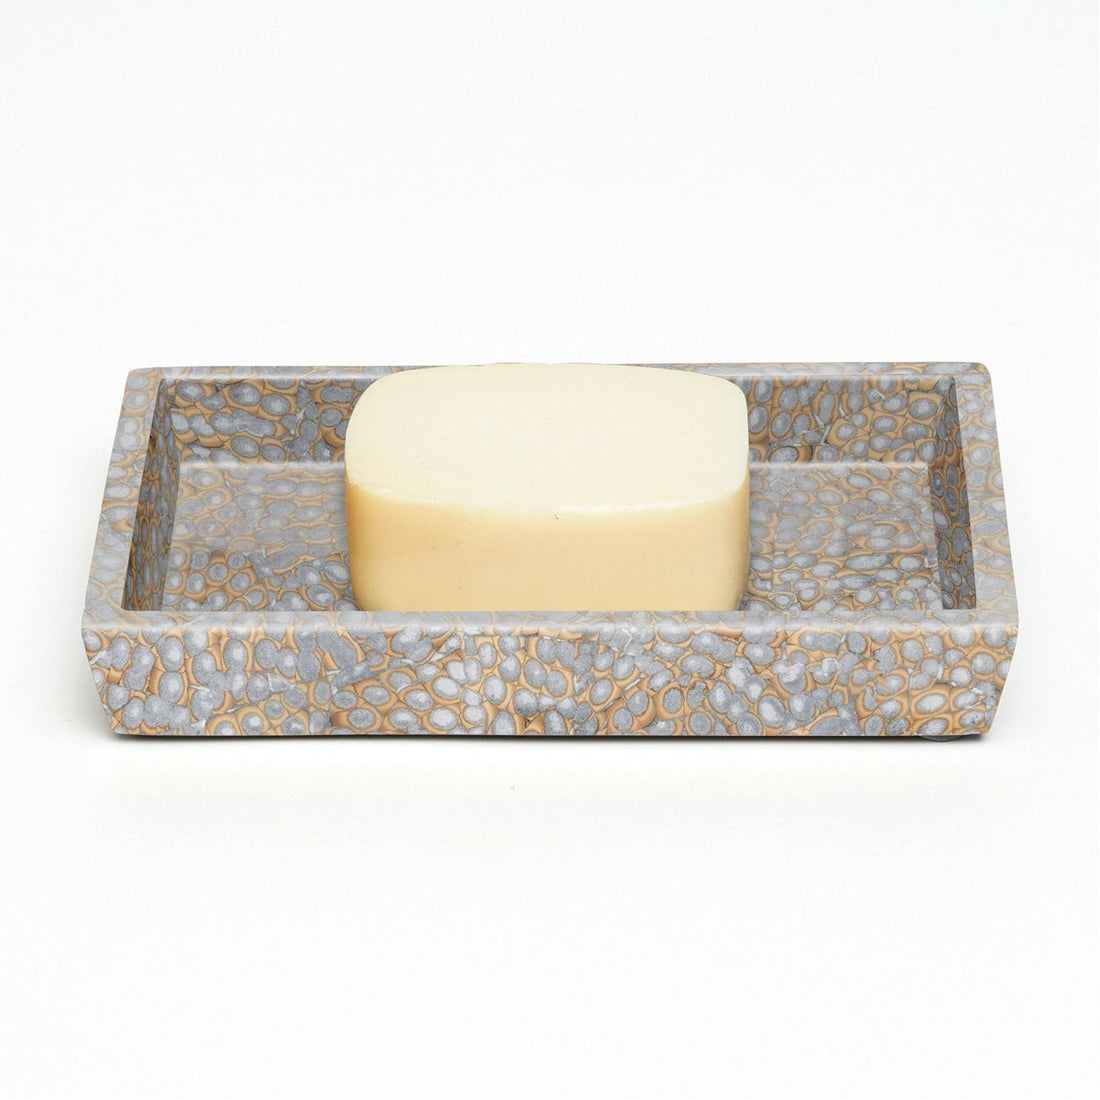 Pigeon and Poodle Callas Rectangular Soap Dish, Tapered